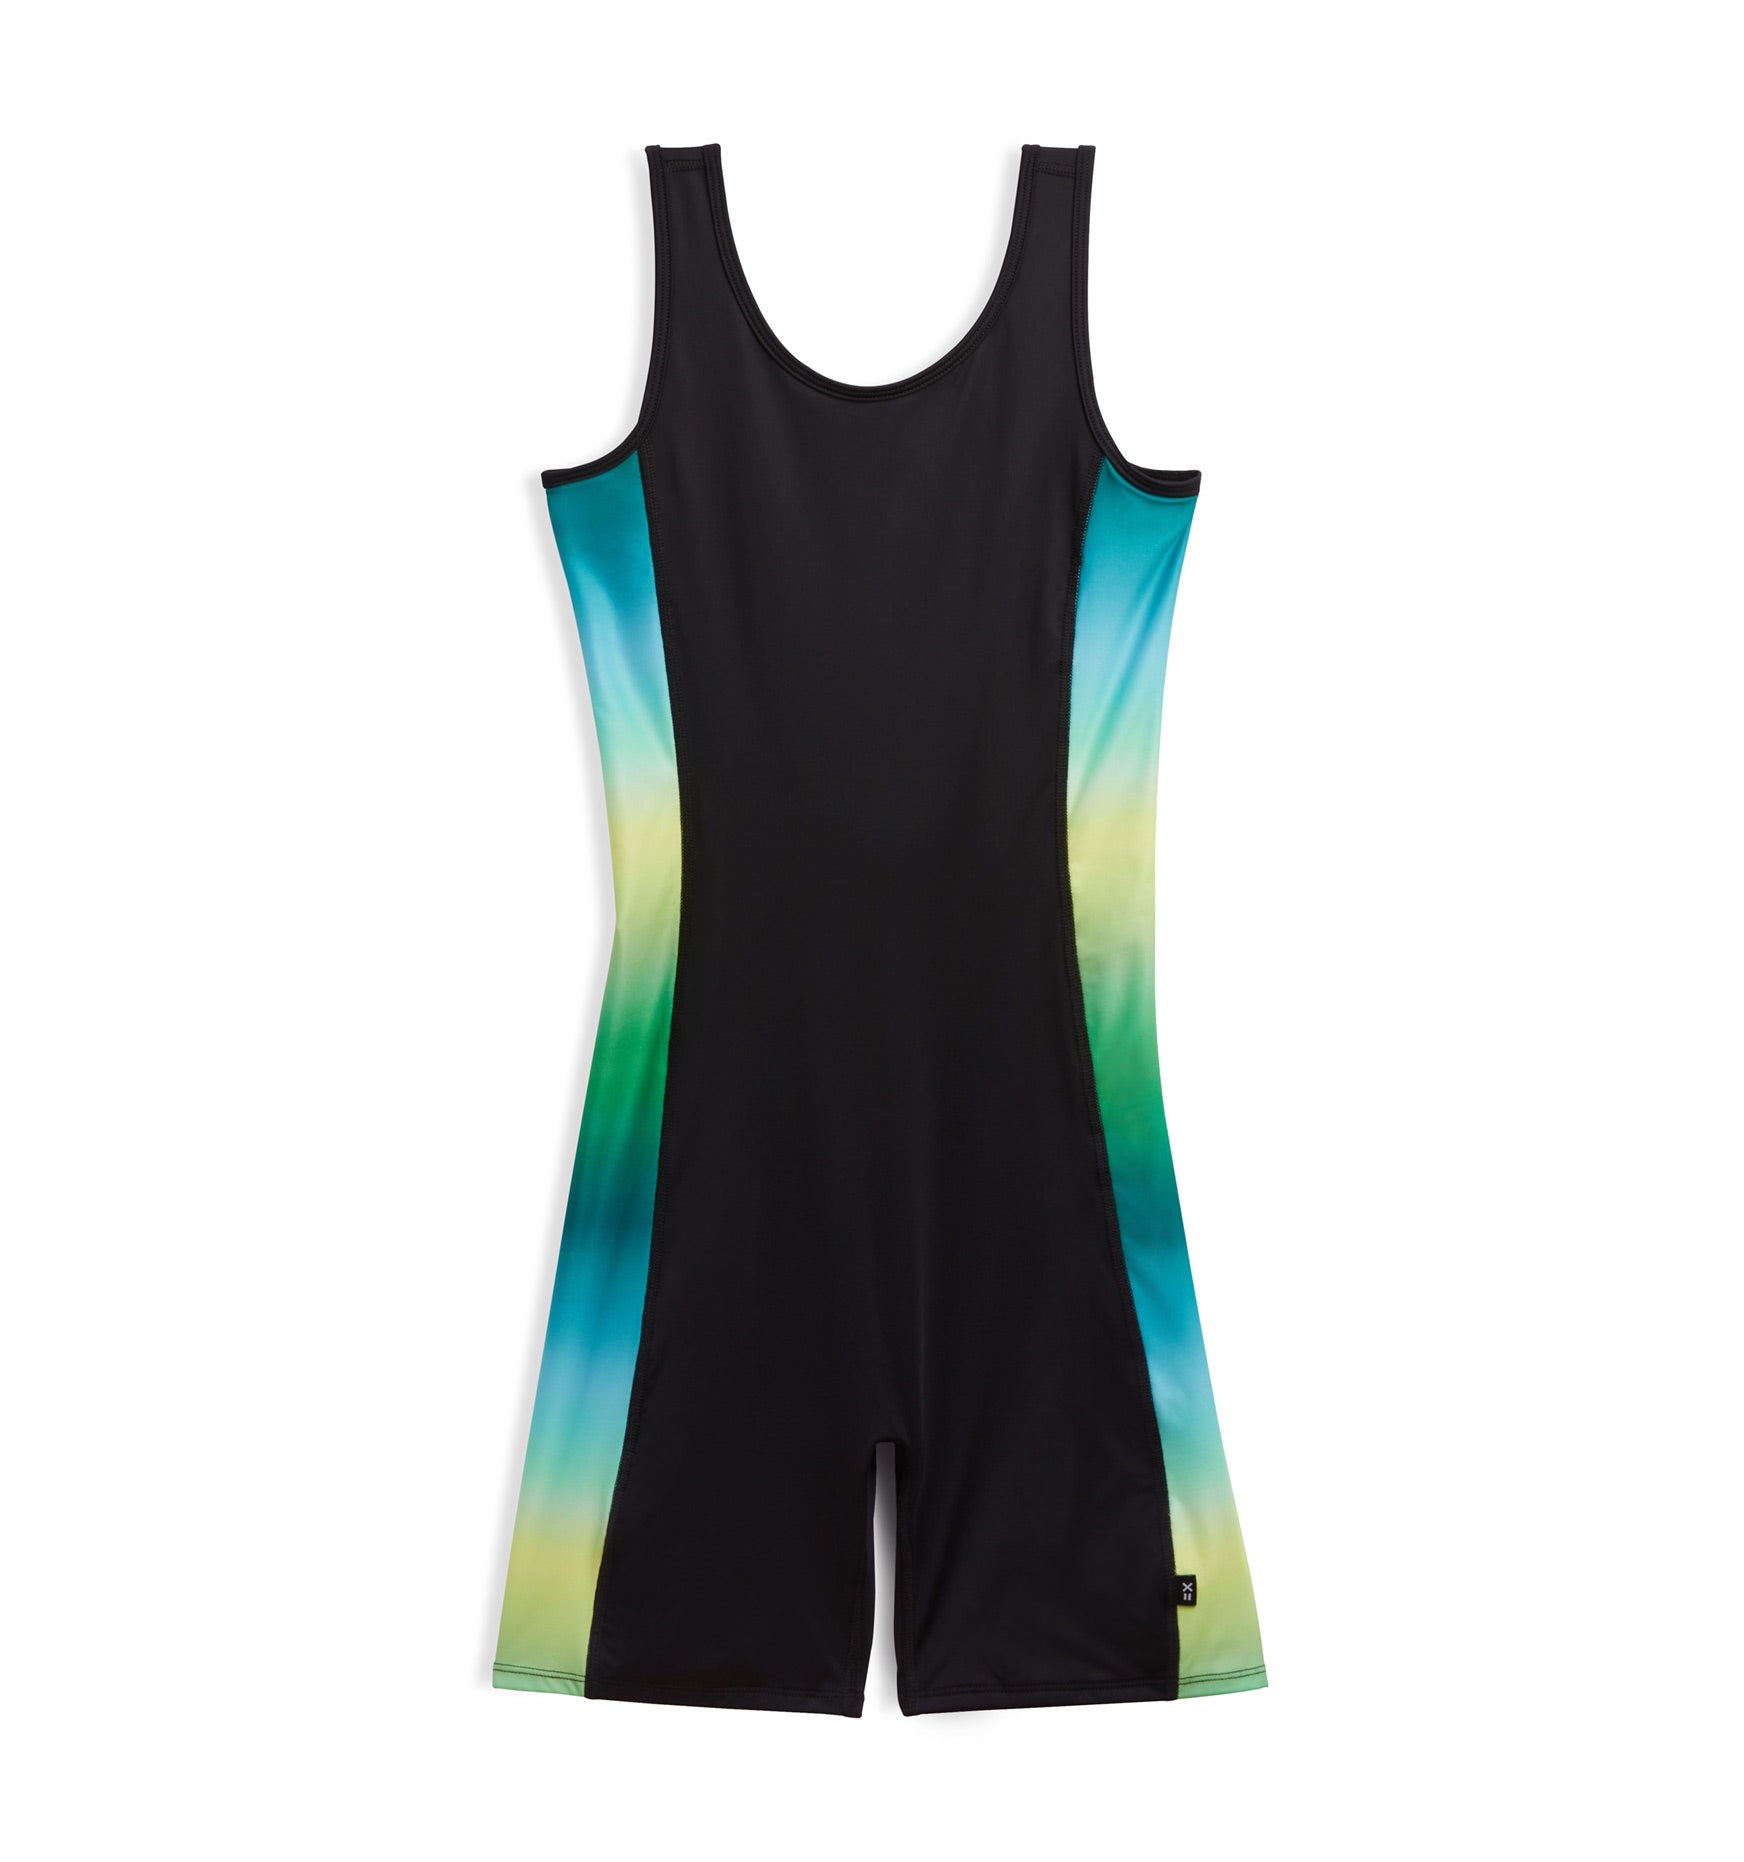 TomboyX Swim 6 Unisuit, One Piece Bathing Suit, UPF 50 Sun Protection,  Fully Lined Full Coverage, Size Inclusive (XS-6X), Don't Be Jelly, X-Small  : : Clothing, Shoes & Accessories